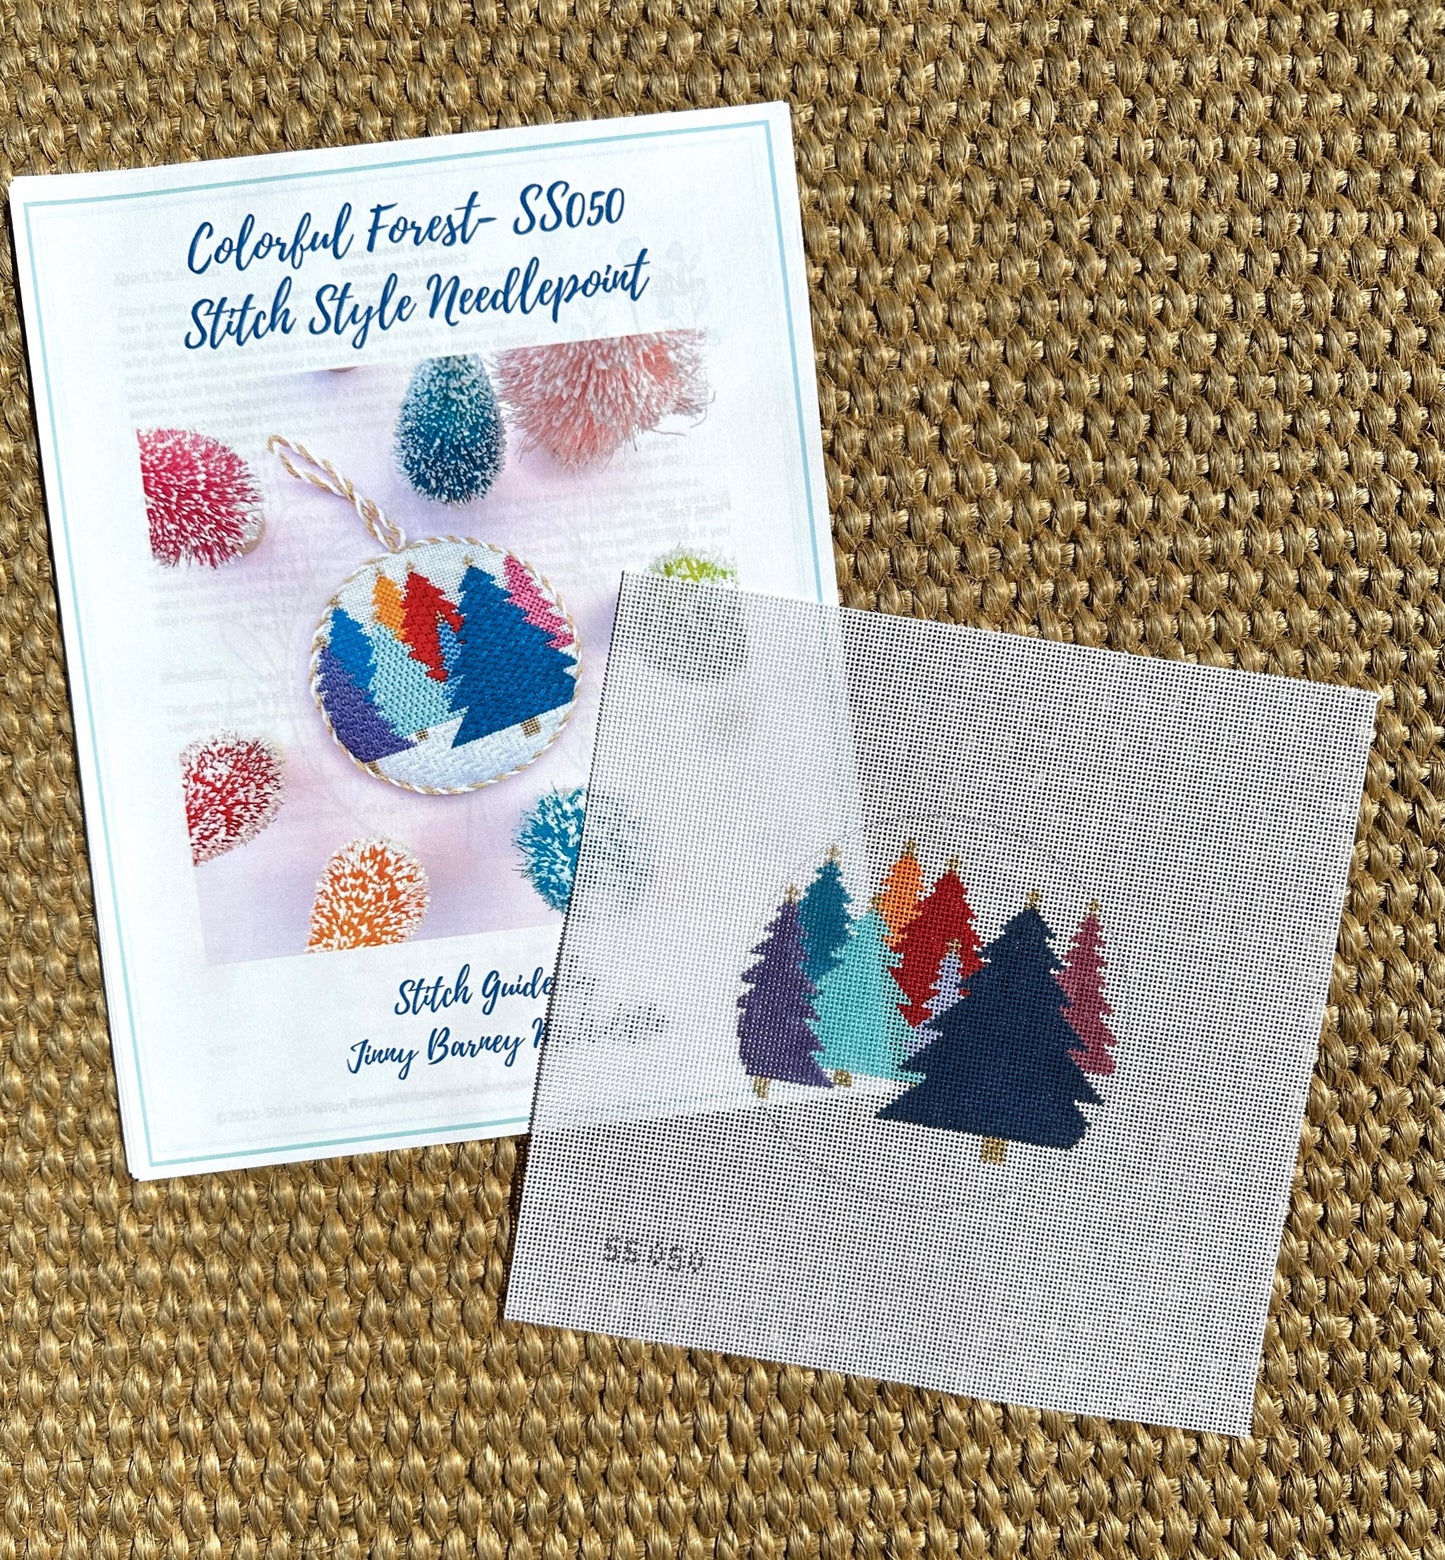 Colorful Forest Canvas & Stitch Guide